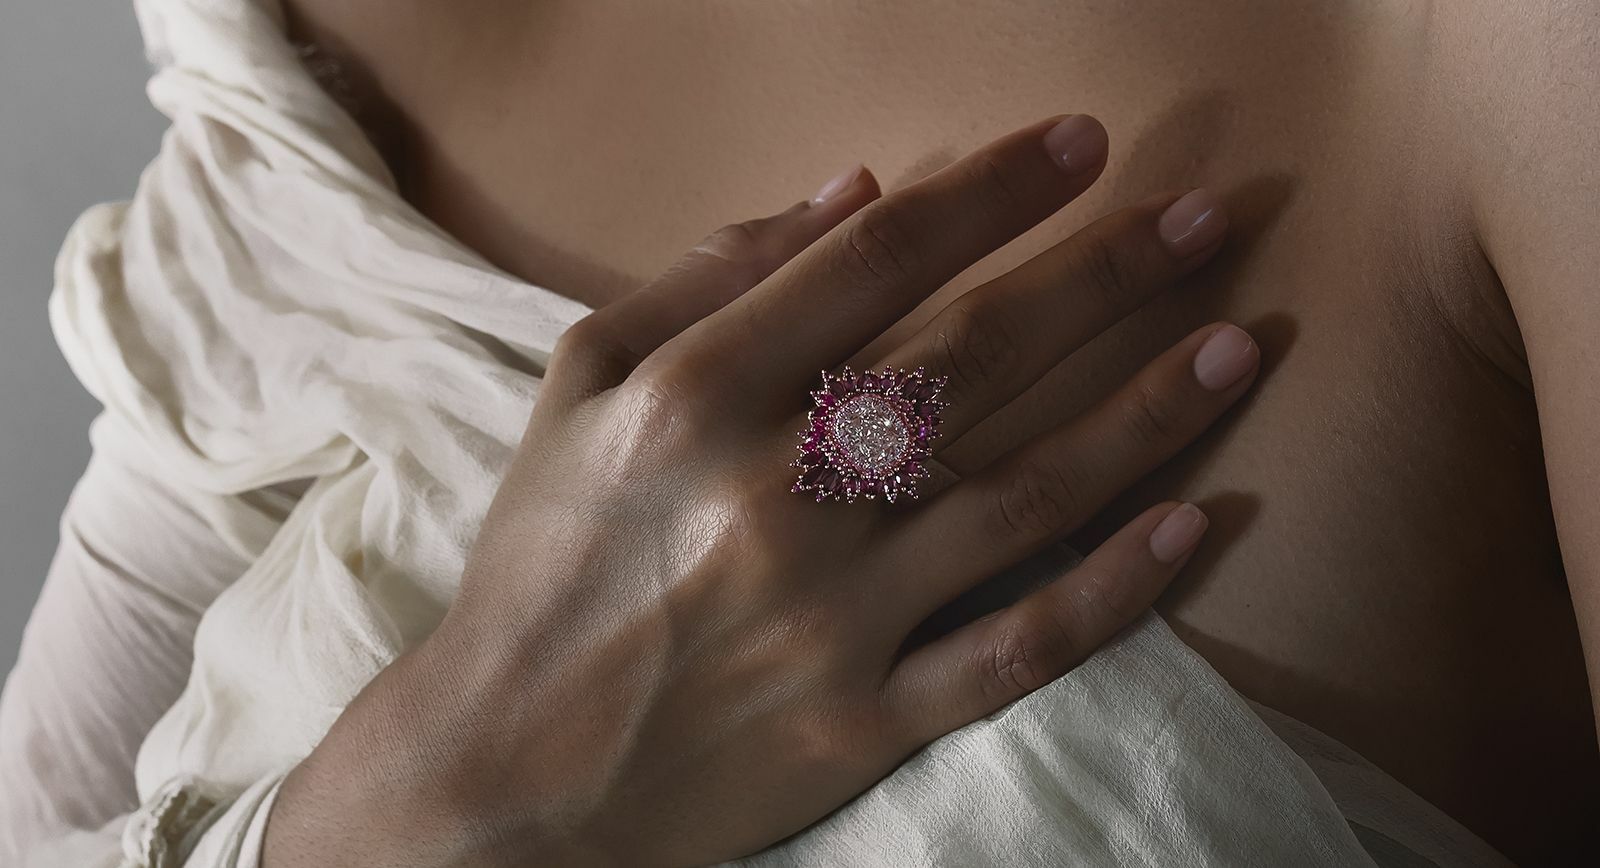 The In Bloom ring by Maggi Simpkins will be presented at the Brilliant and Black exhibition, hosted by Sotheby's